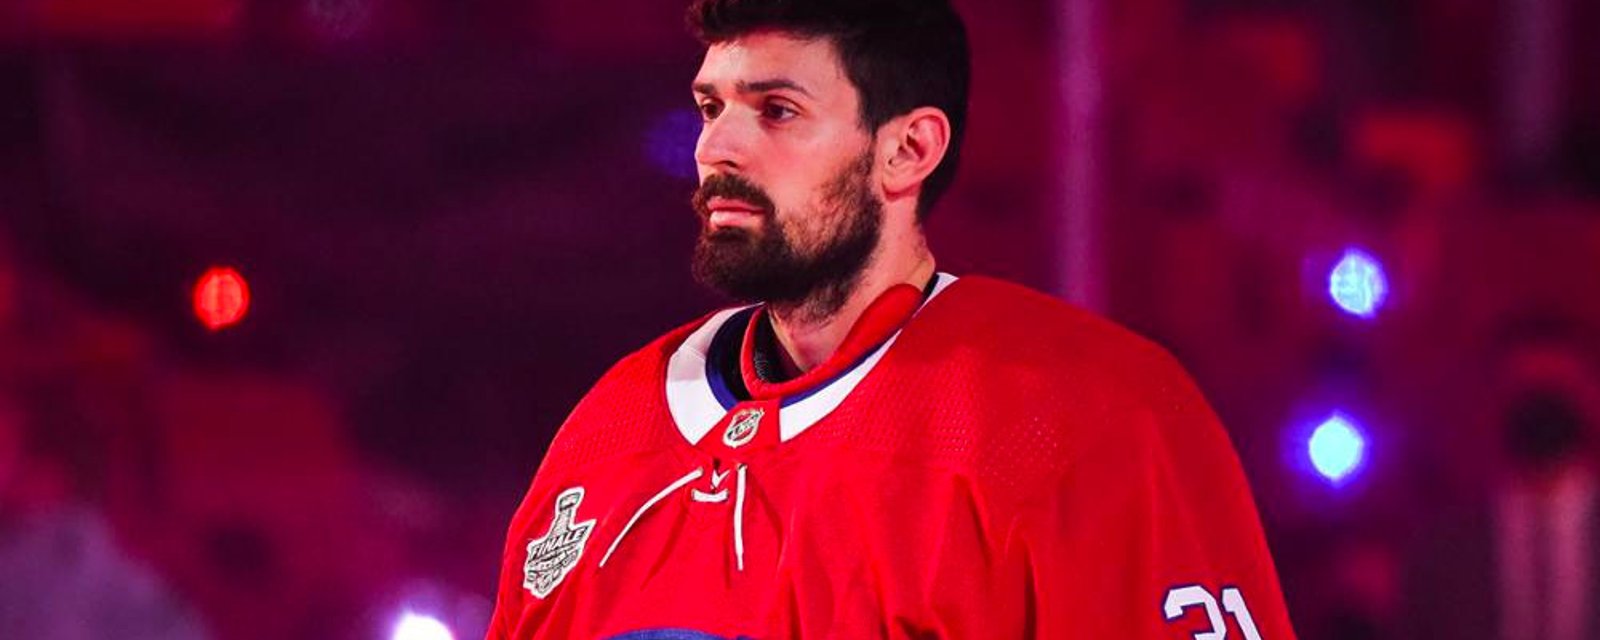 Carey Price won't play this season, NHL future looks to be in doubt